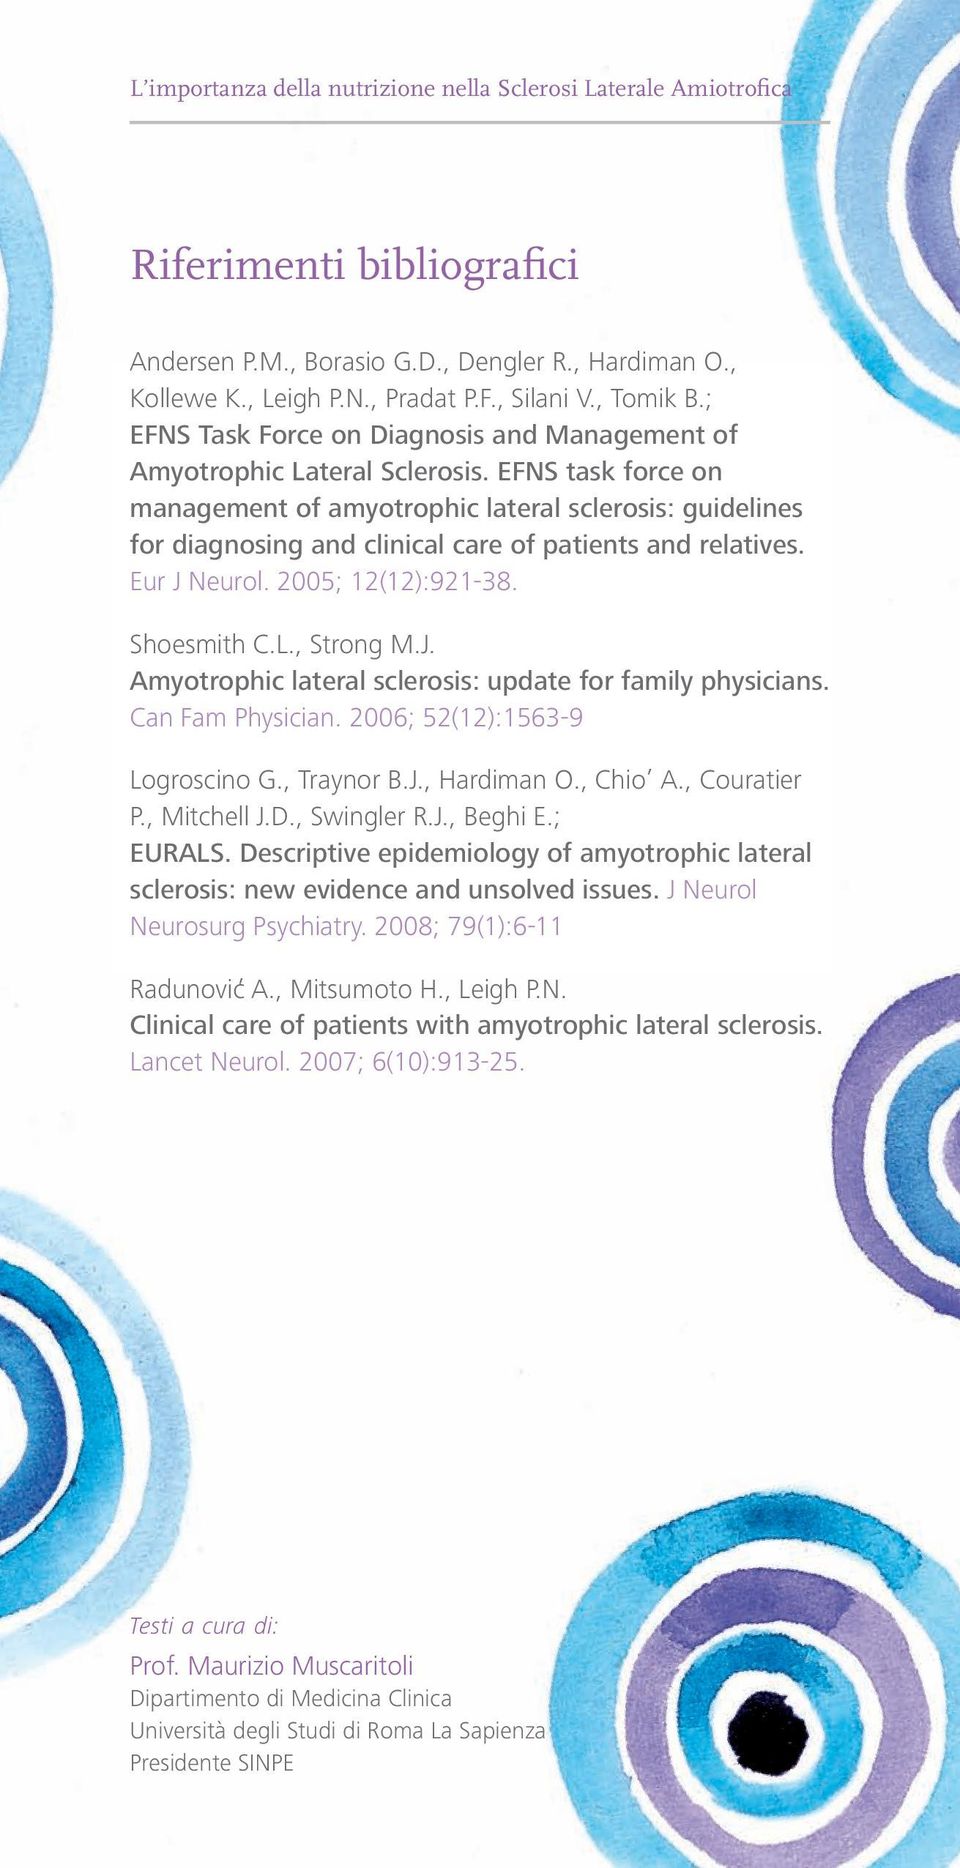 EFNS task force on management of amyotrophic lateral sclerosis: guidelines for diagnosing and clinical care of patients and relatives. Eur J 